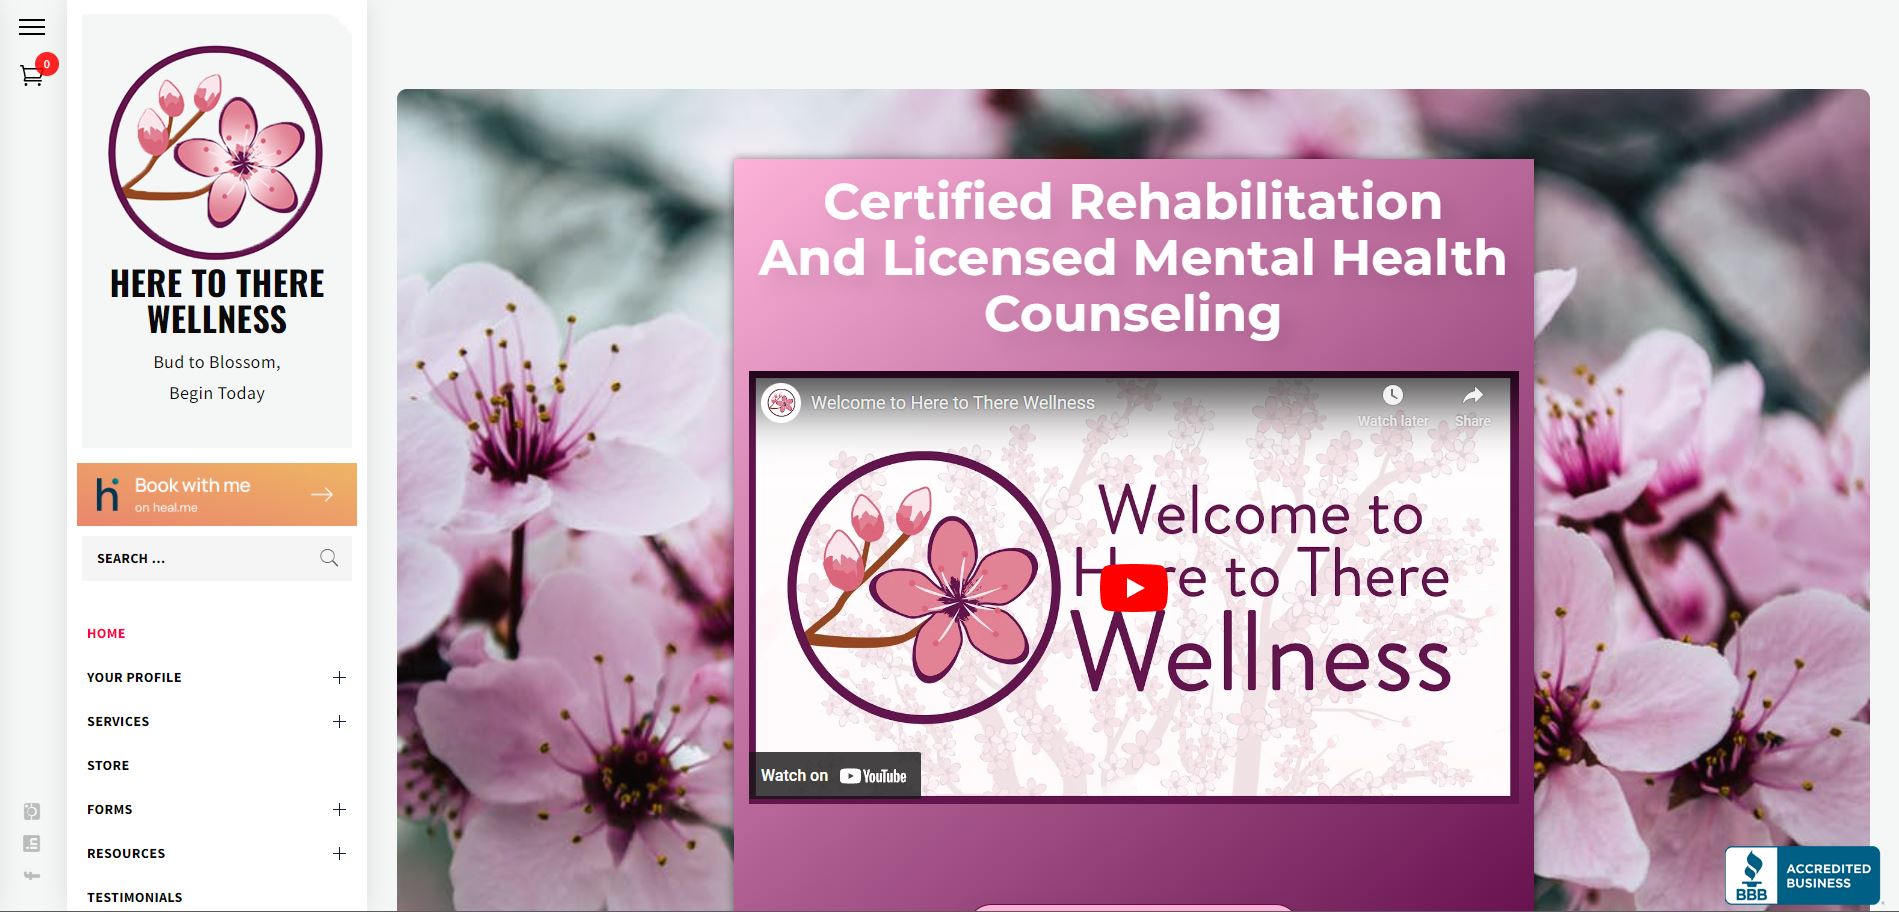 Here To There Wellness Website image